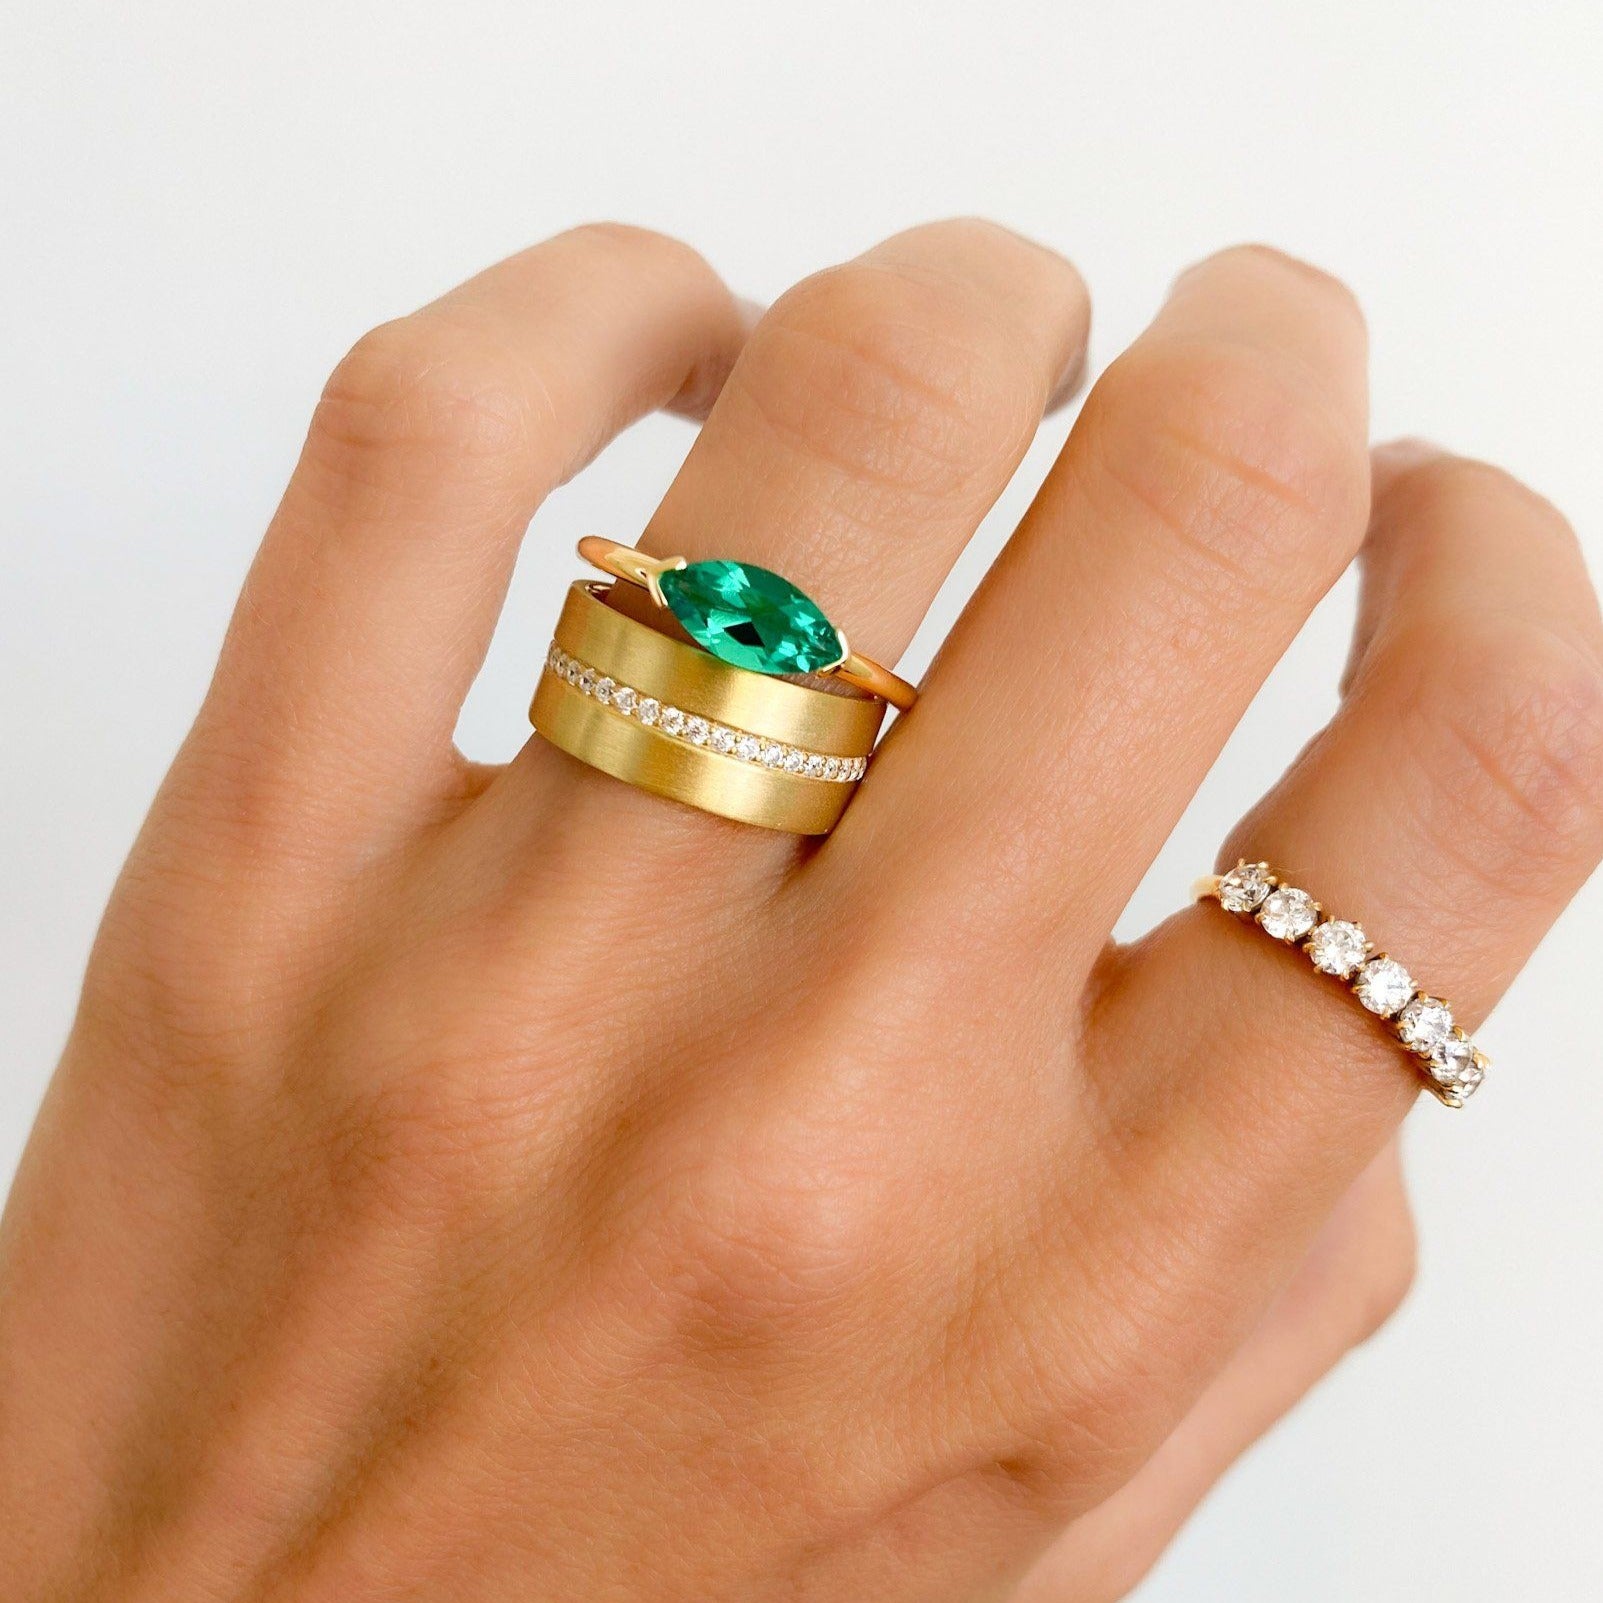 East West Half Bezel Solitaire Engagement Ring With Green Emerald Marquise Cut by Good Stone in Yellow Gold